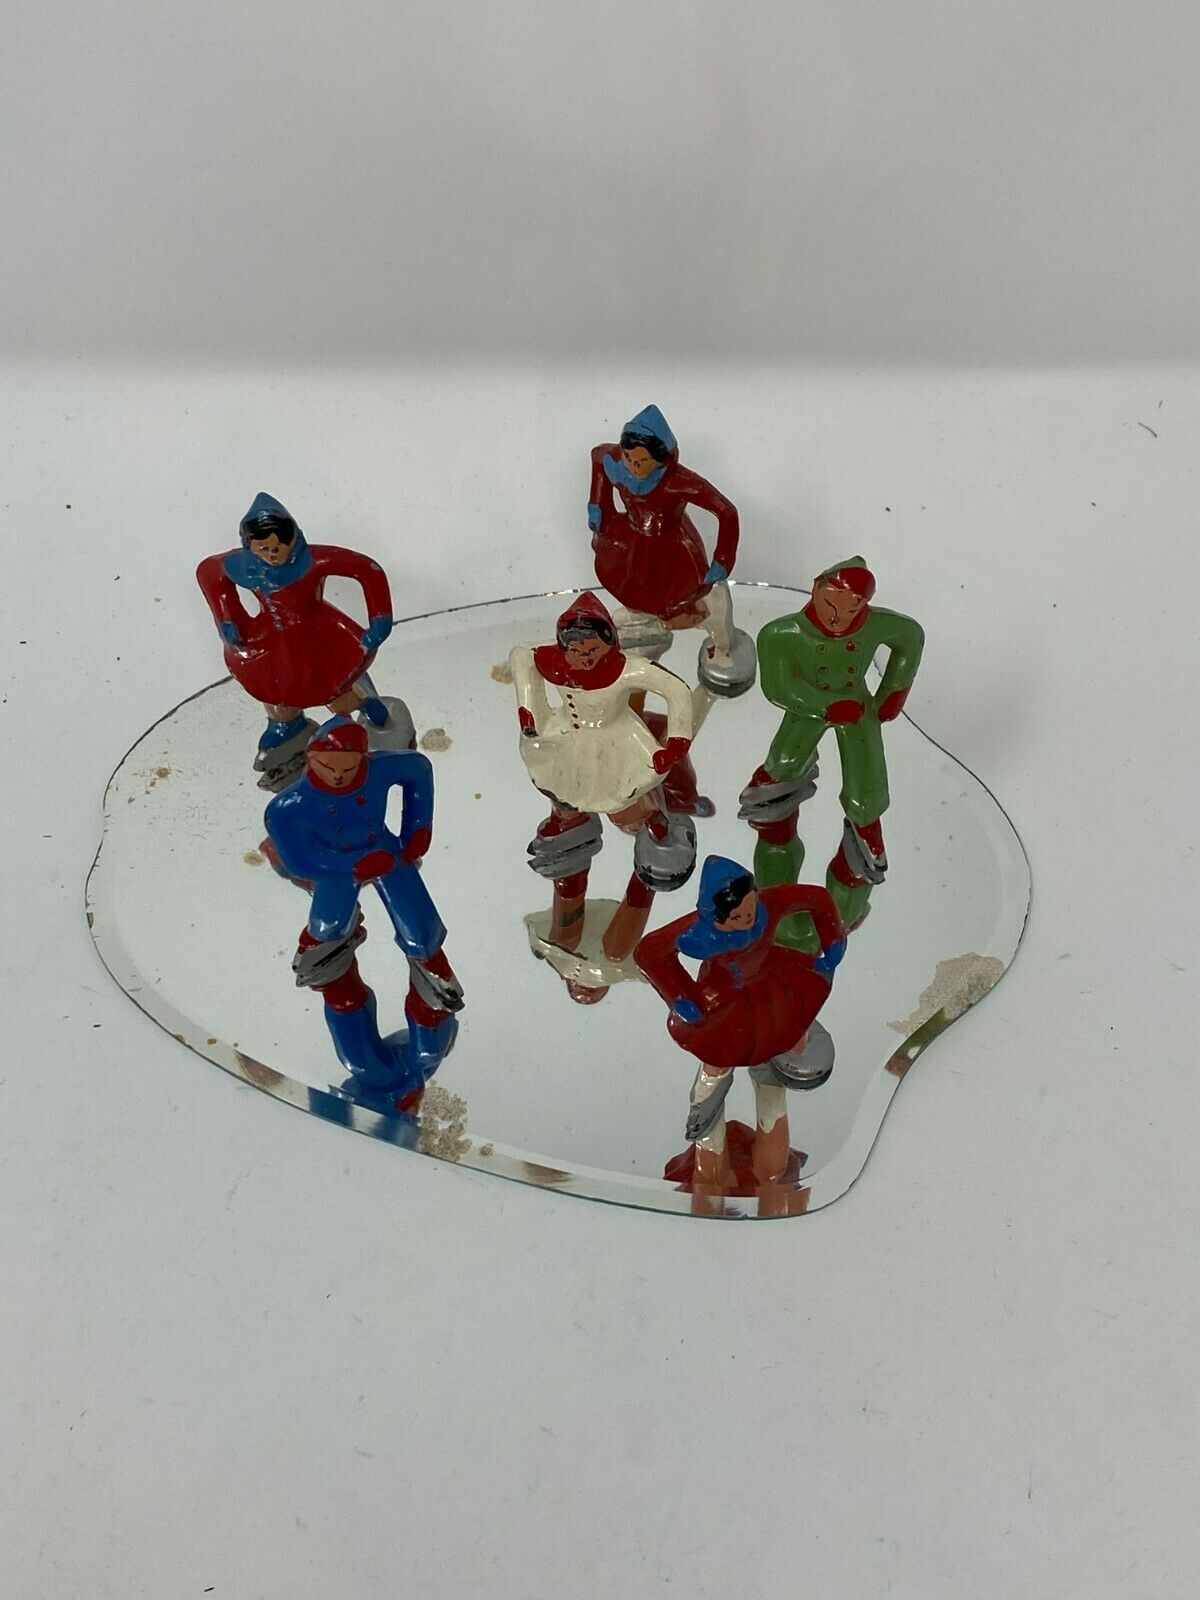 1950s Barclay Lead Figures- Six Skaters And Pond (mirror)- 2 Men And 4 Women